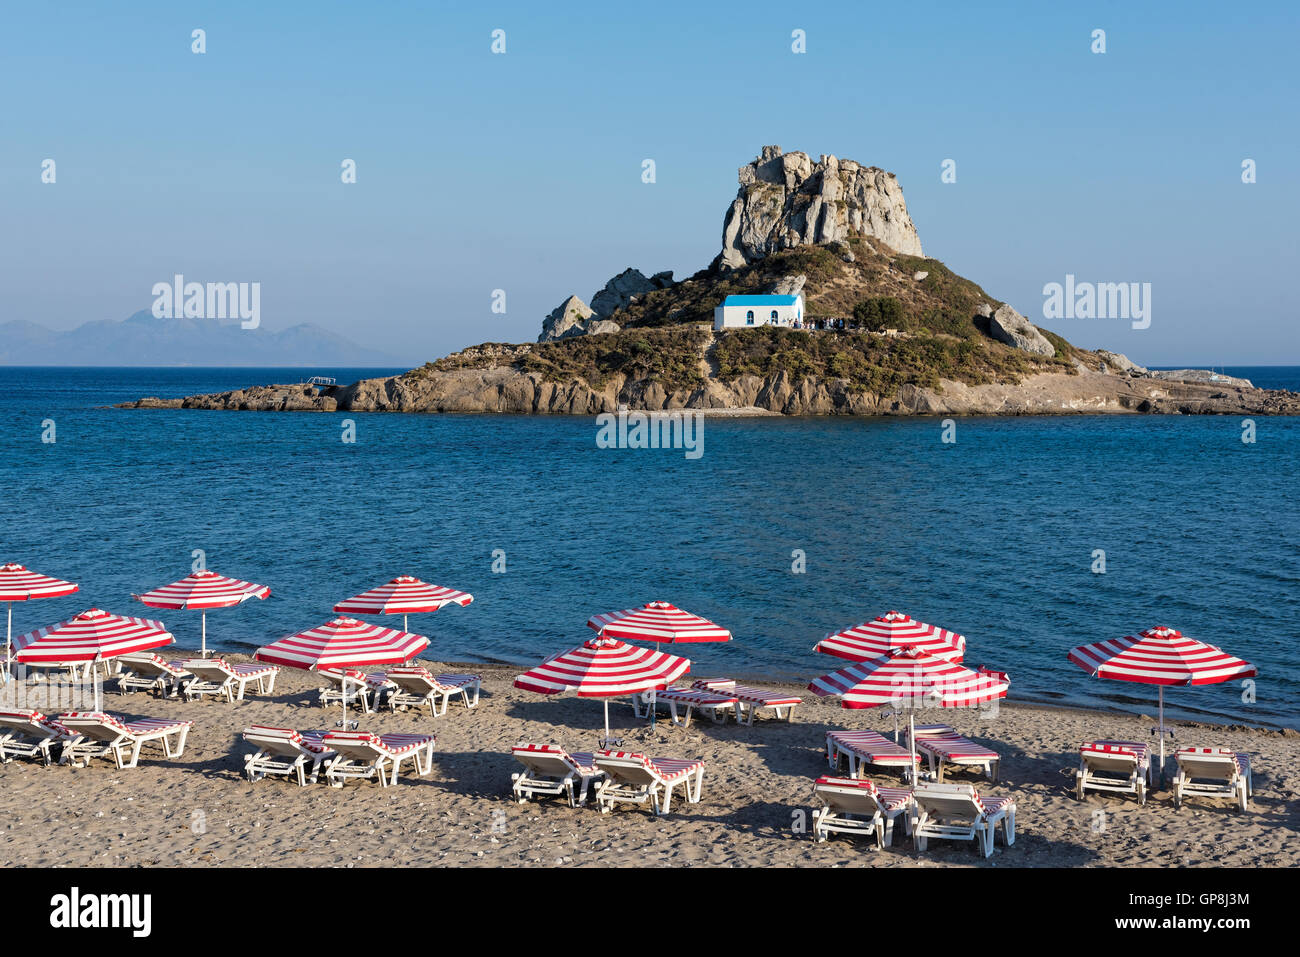 Landscape with sandy beach and islet in Kos island, Greece Stock Photo